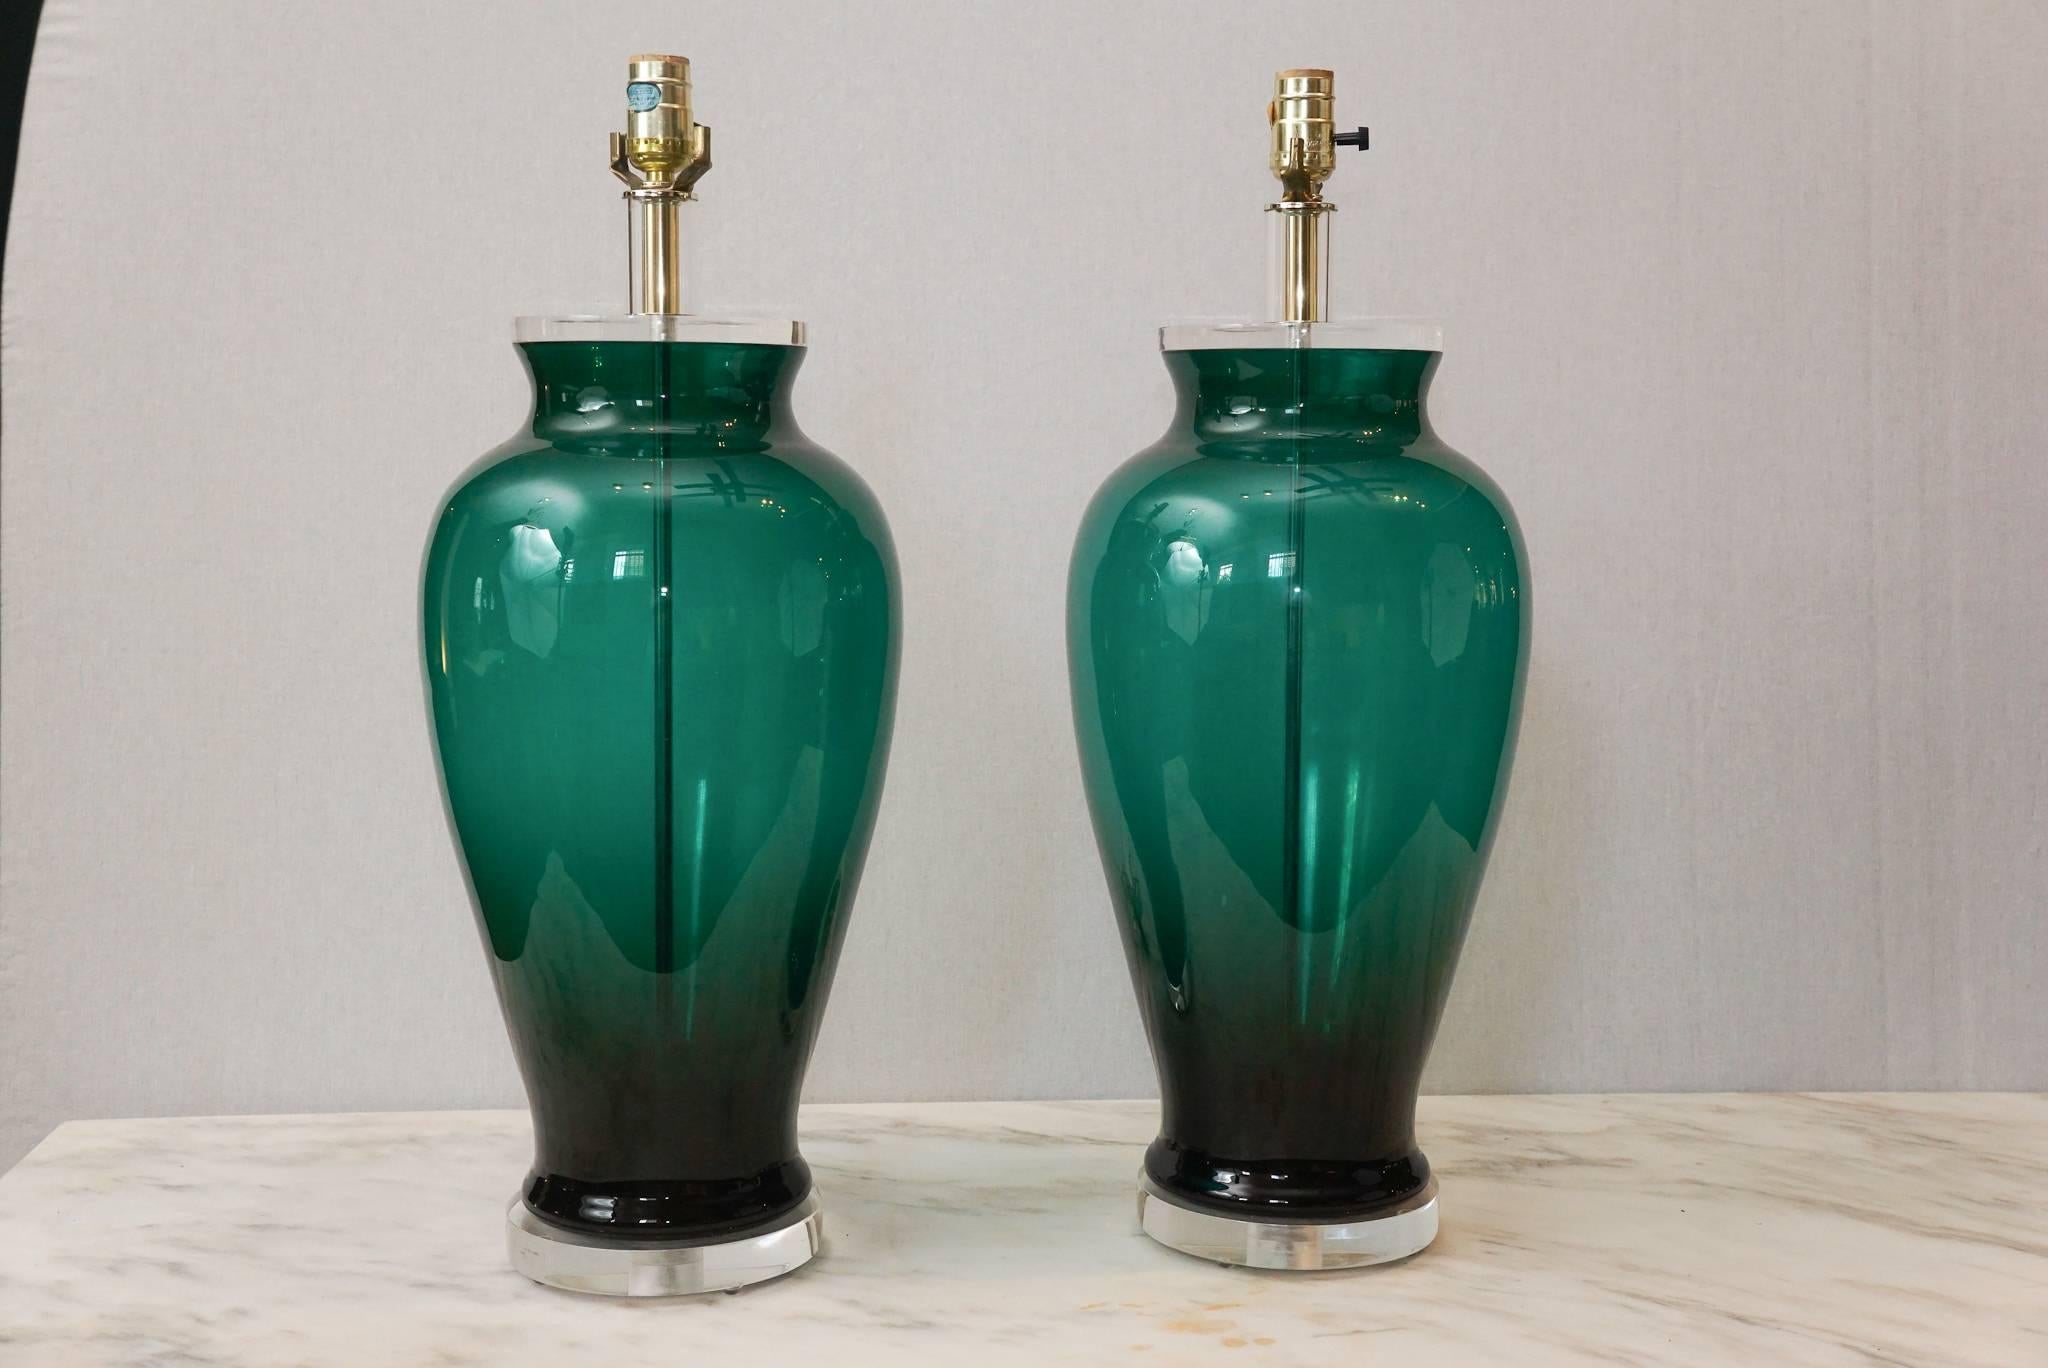 Beautiful deep blue-green Blenko style glass vases - with Lucite cap and base - includes clear Lucite cylindrical finials - illegible label - measurements do not include harp and shade, just the lamp.